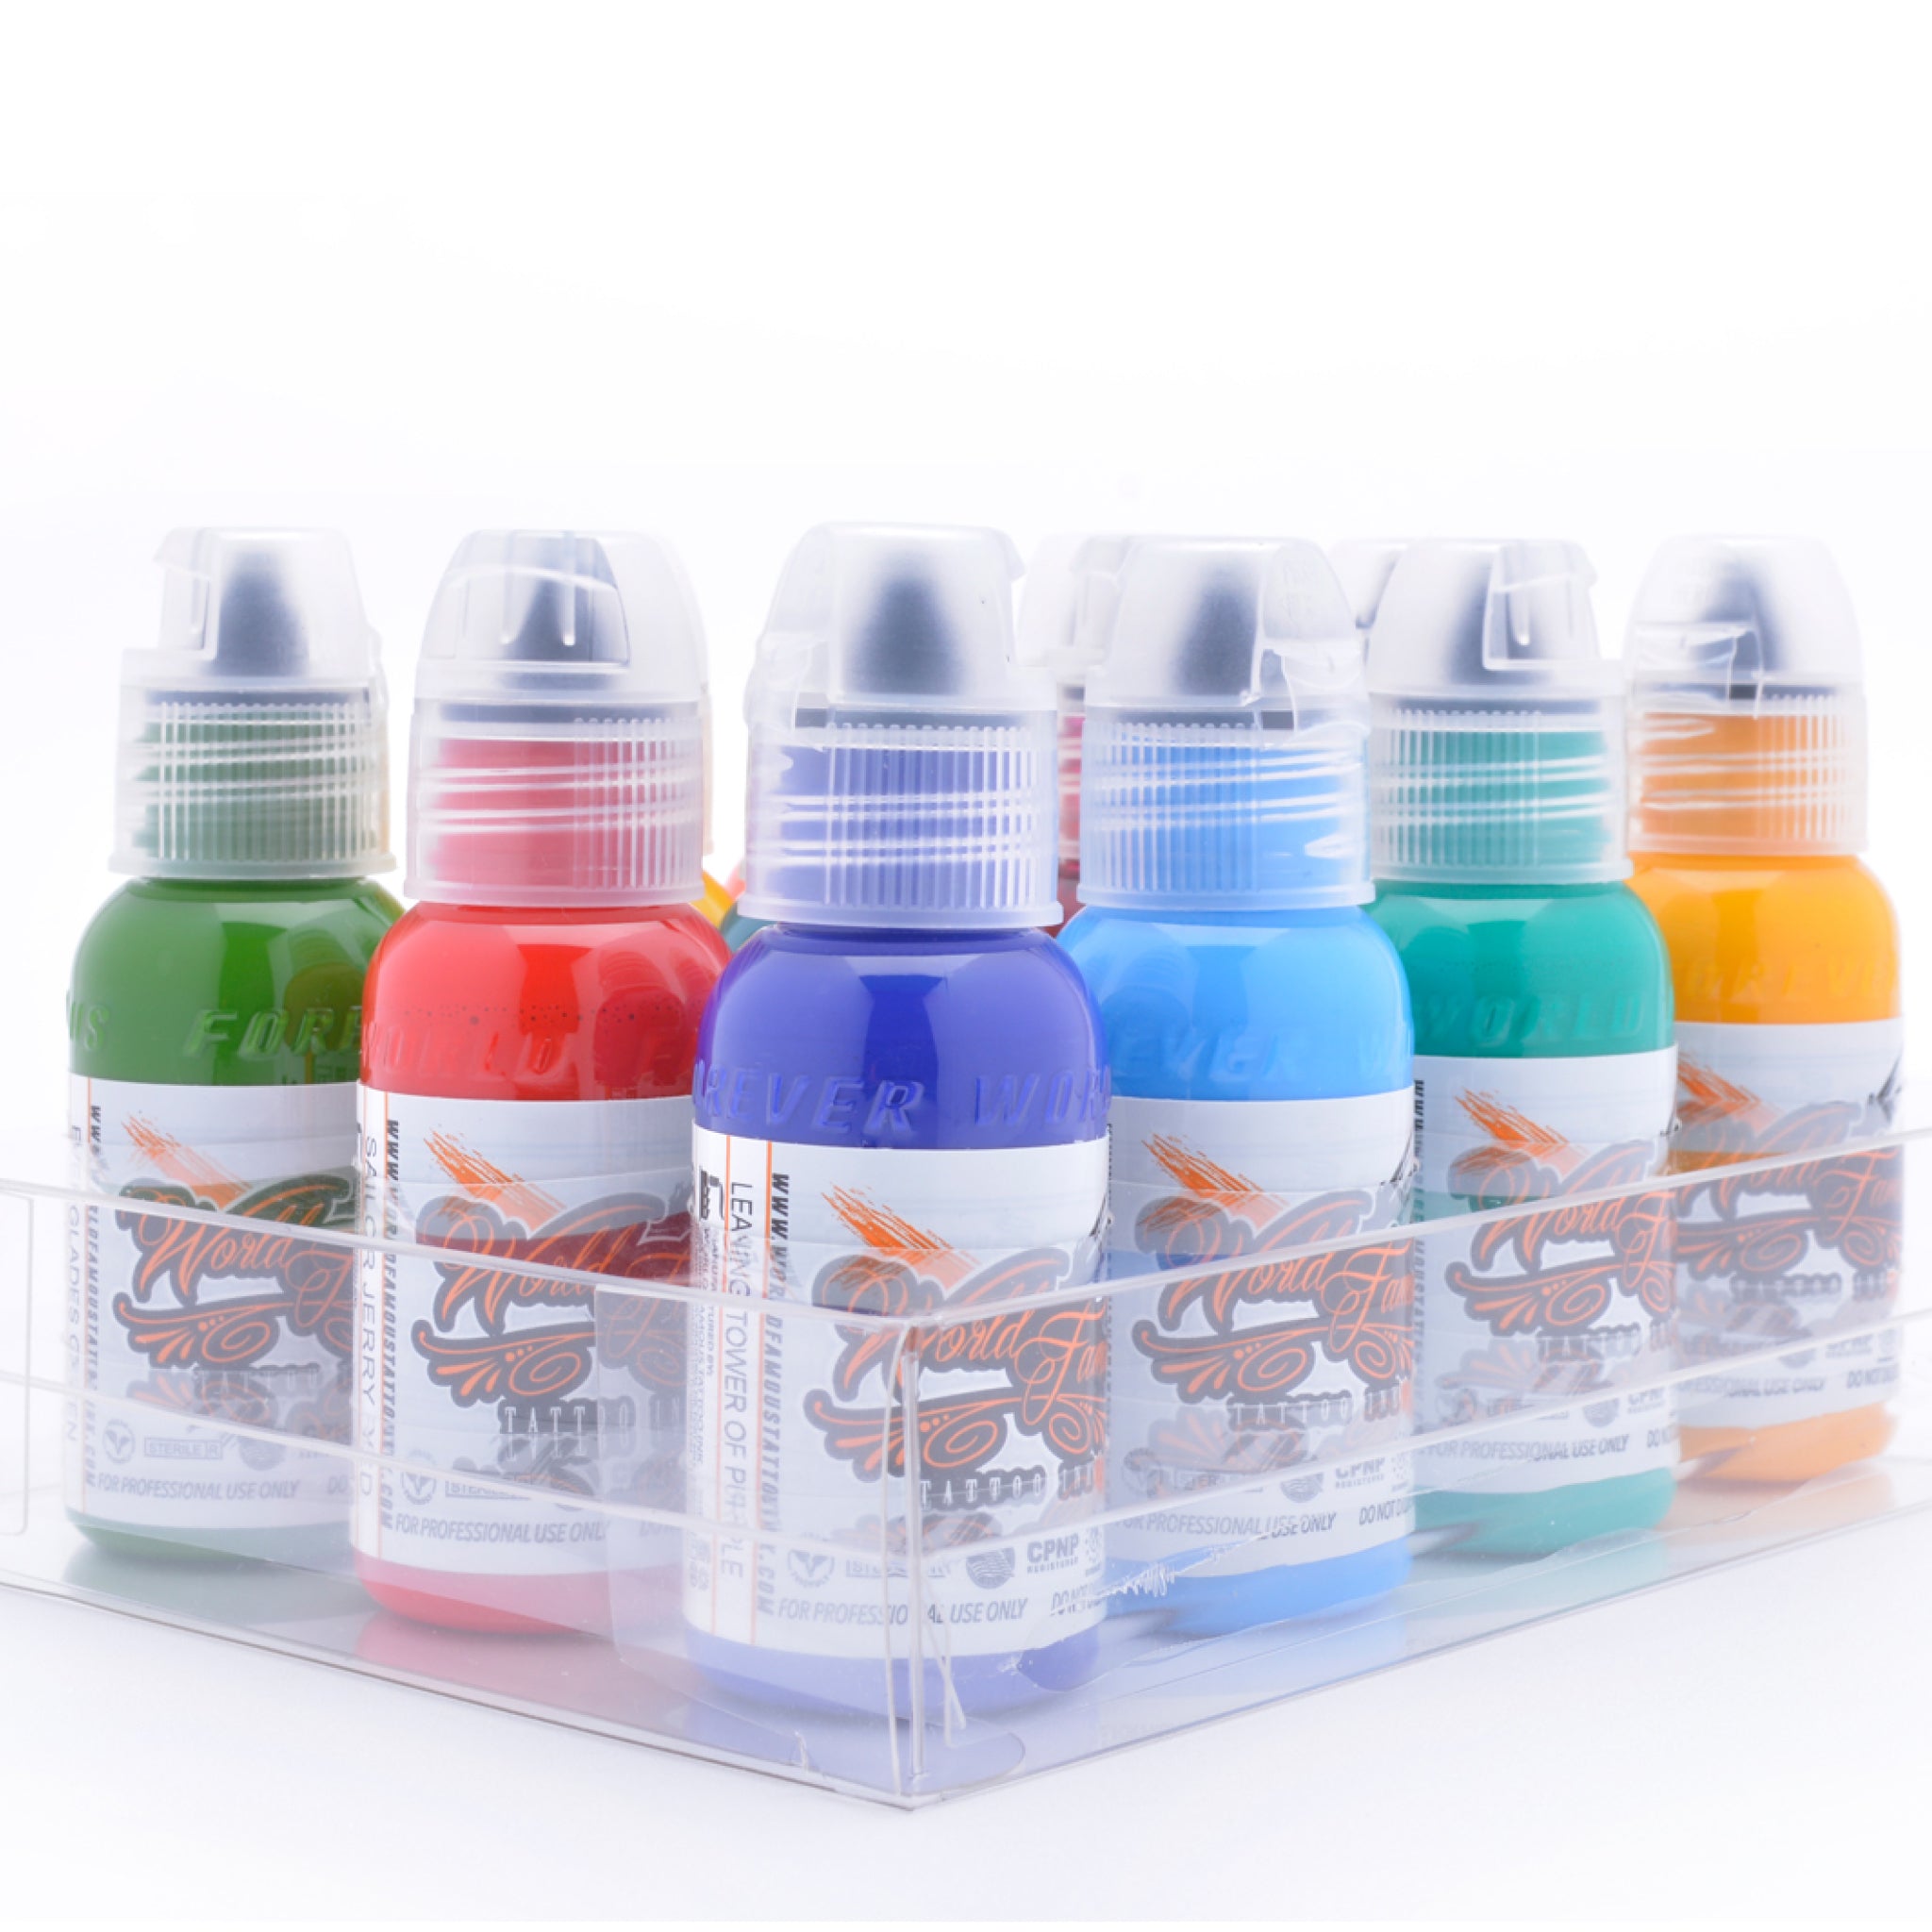 World Famous Tattoo Ink 7 Color Simple Set